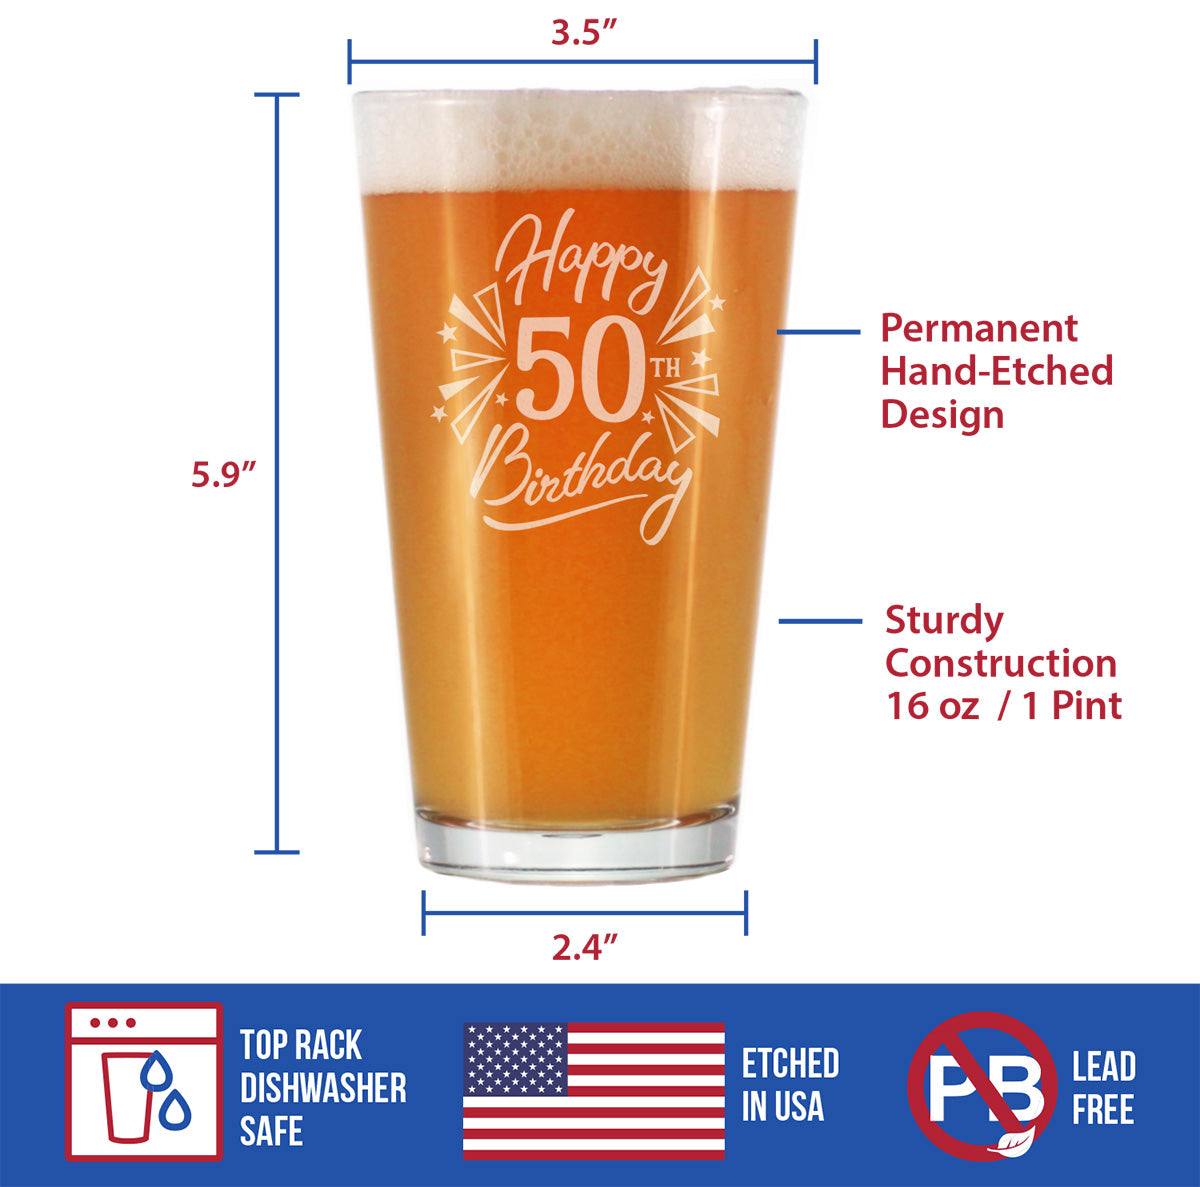 Happy 50th Birthday - Pint Glass for Beer - Gifts for Women &amp; Men Turning 50 - Fun Bday Party Decor - 16 Oz